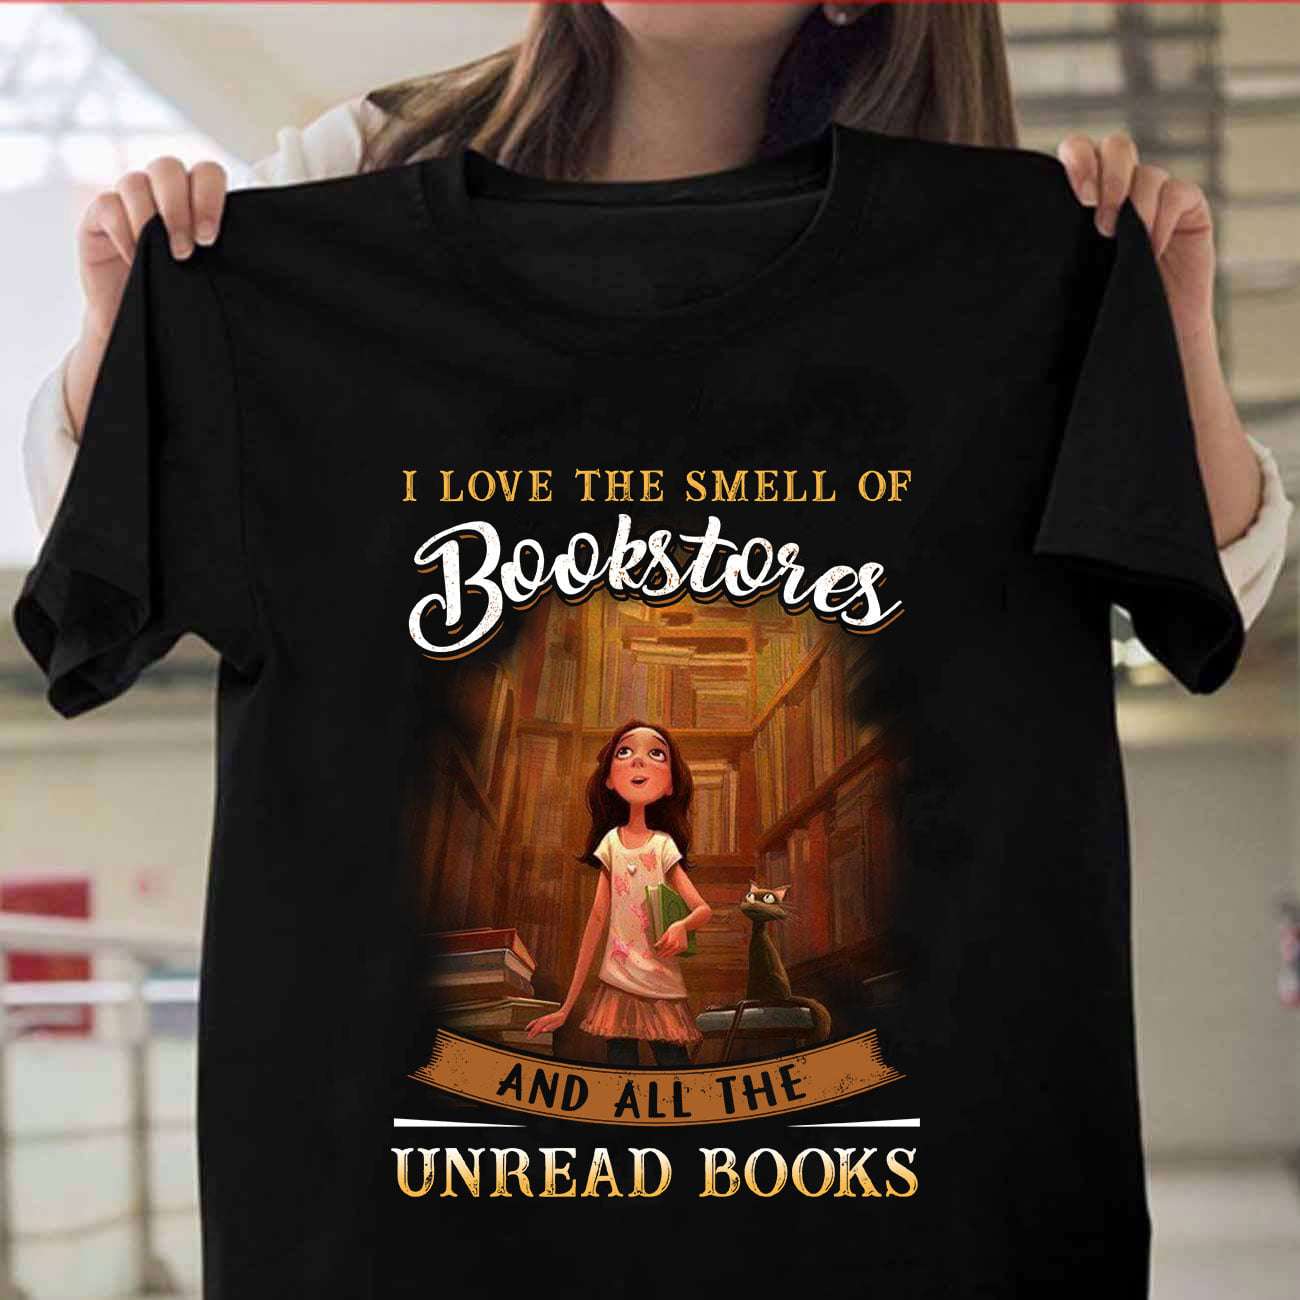 Girl In Bookstore, Girl Love Books - I love the smell of bookstores and all the unread books